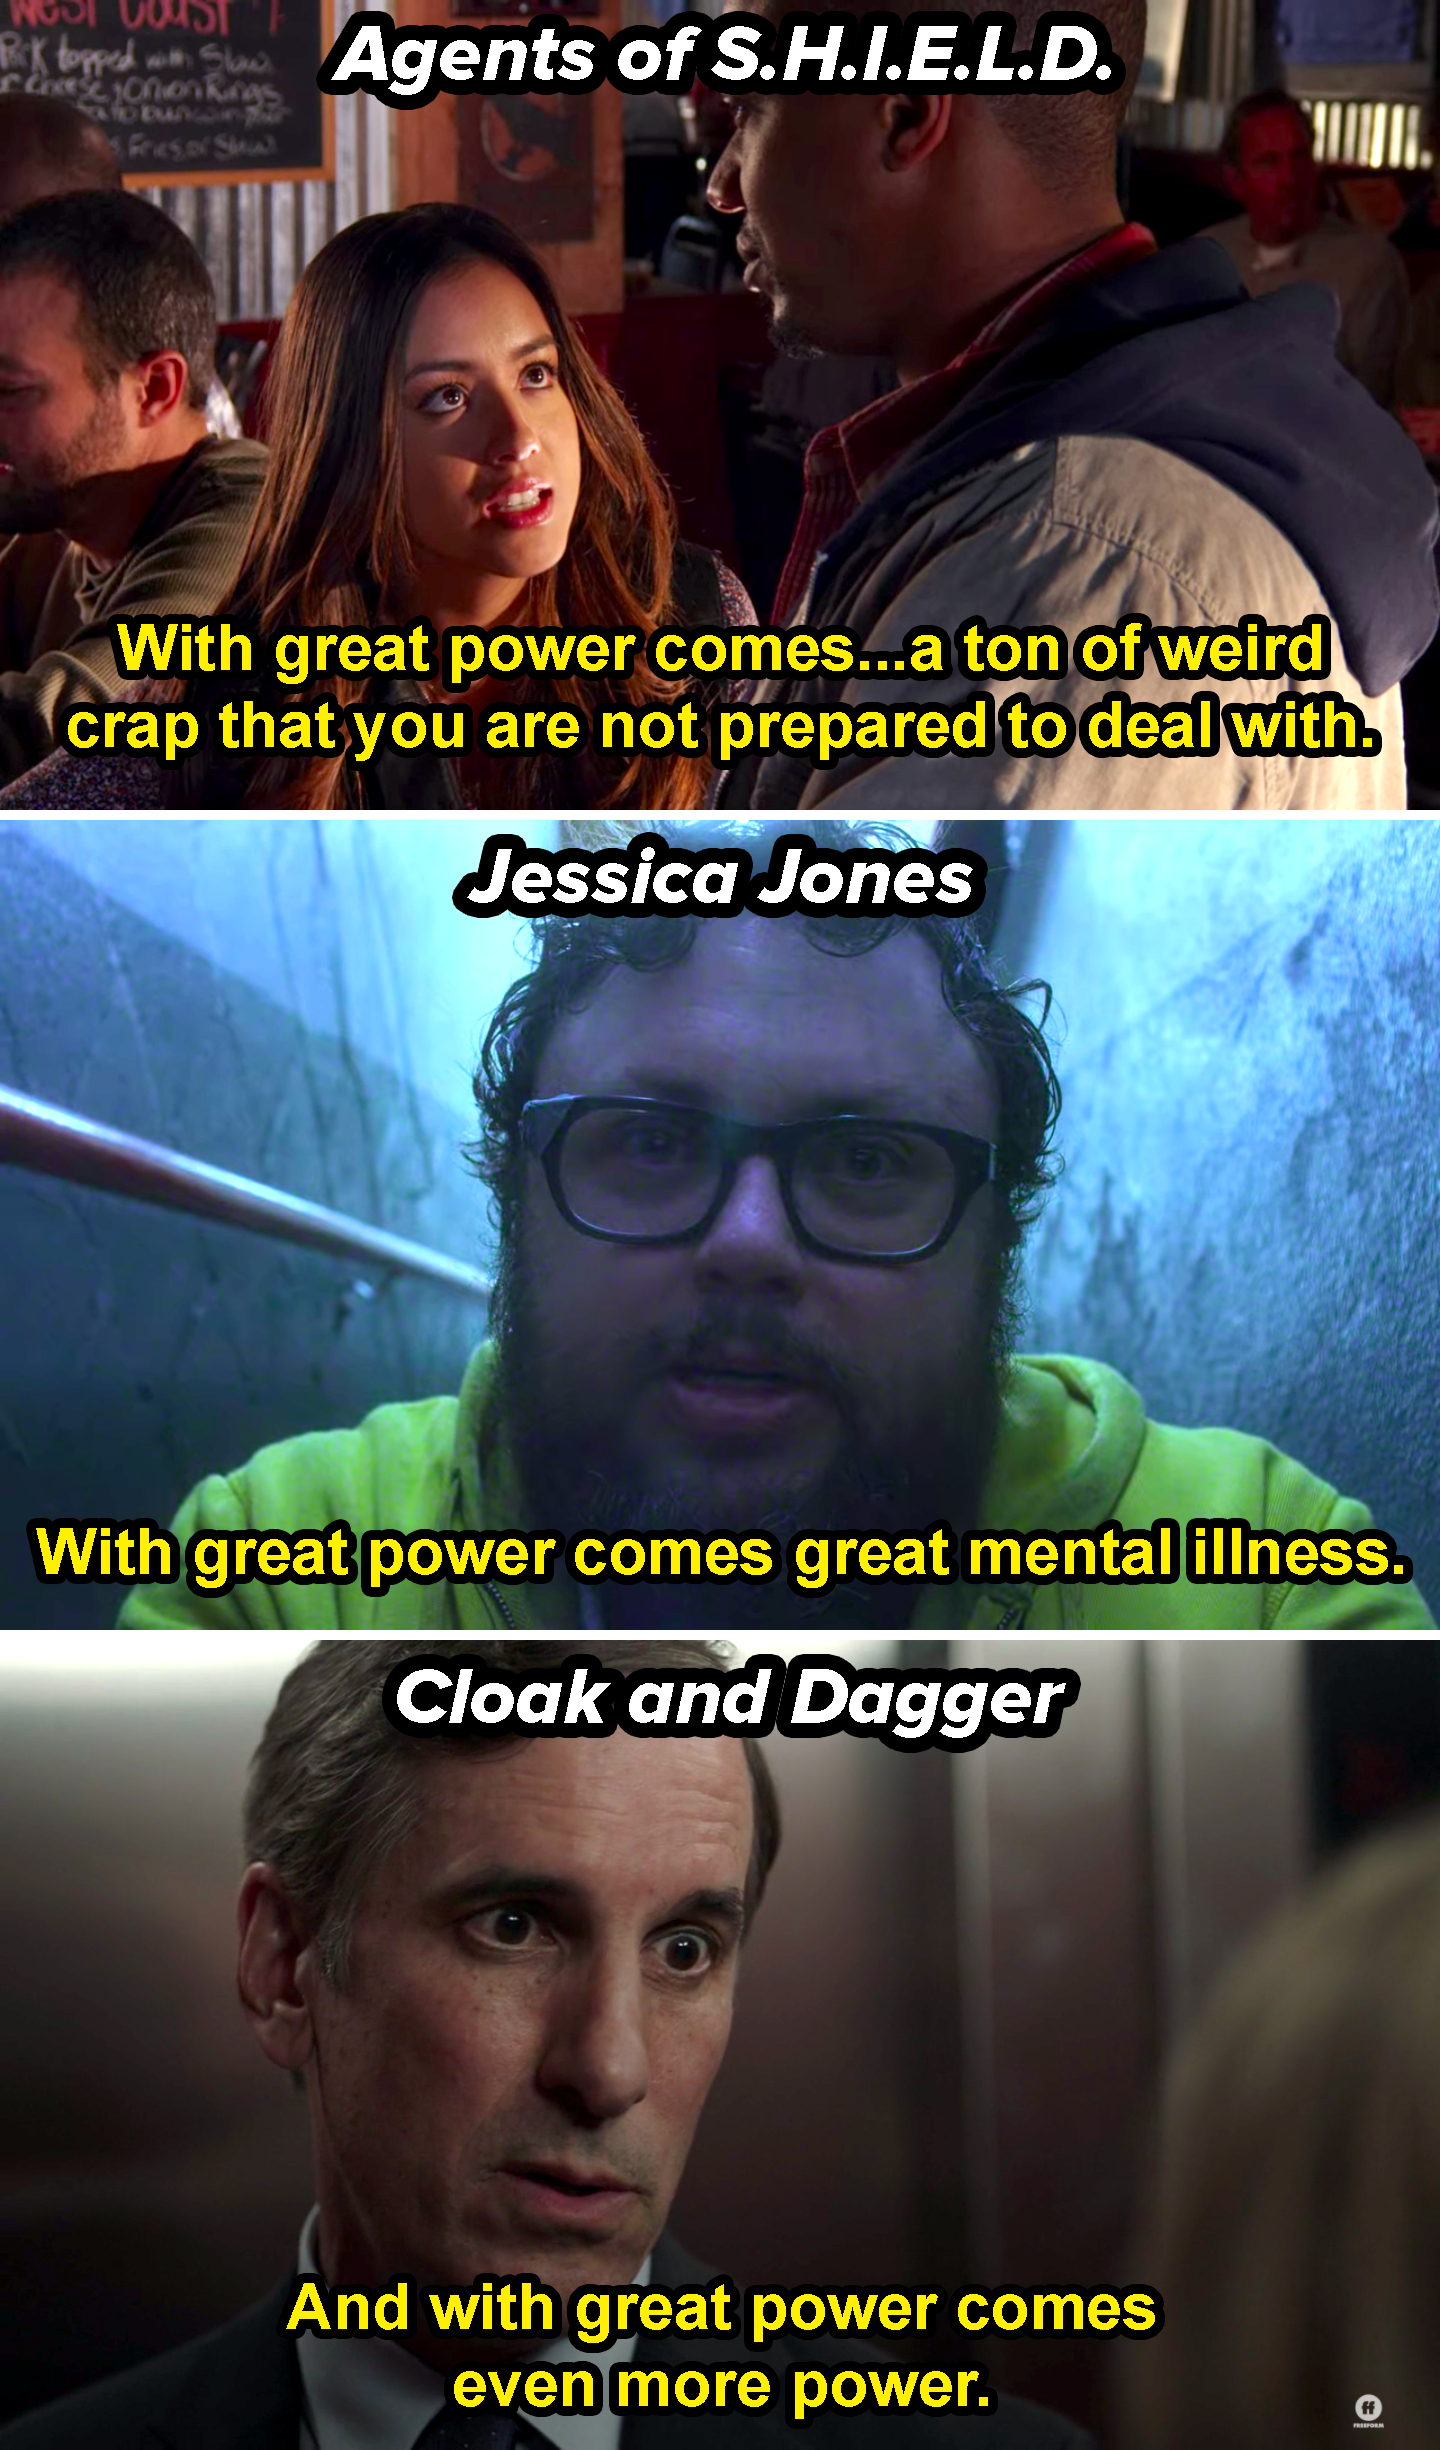 Agents of Shield quote: &quot;With great power comes a ton of weird crap that you are not prepared to deal with,&quot; Jessica Jones quote: &quot;With great power comes great mental illness,&quot; and Cloak and Dagger quote: &quot;With great power comes even more power&quot;